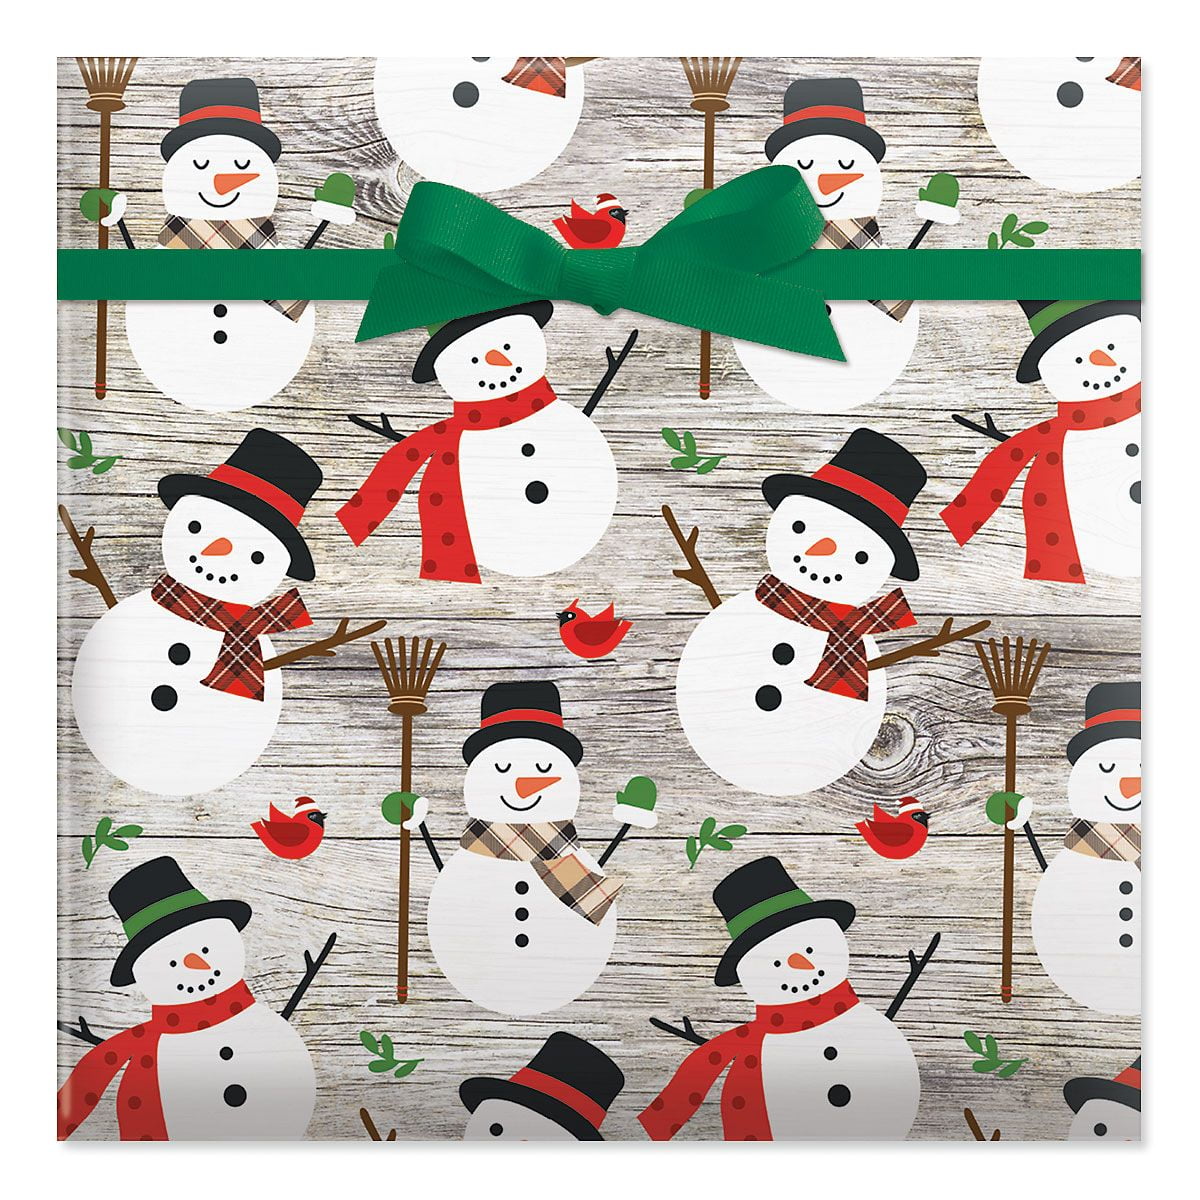 70 sq ft Frosty the snowman wrapping paper Never used 